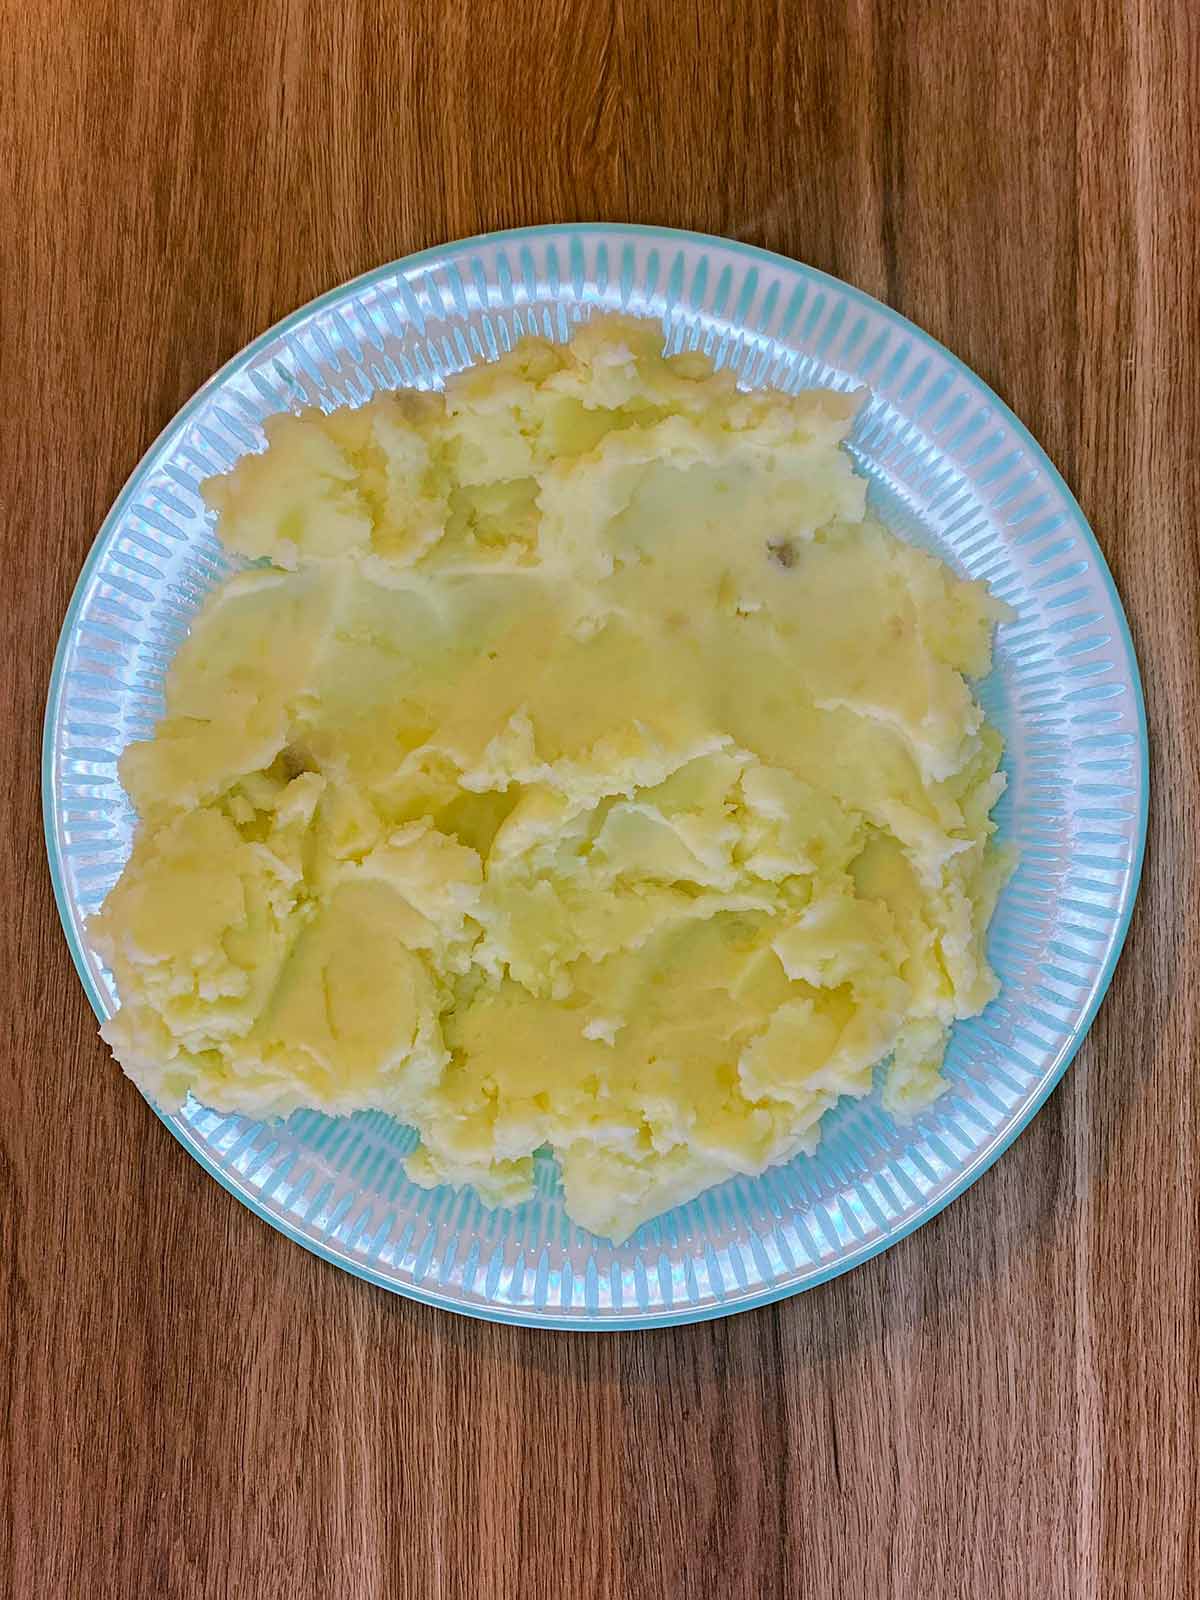 A plate of cold mashed potato.